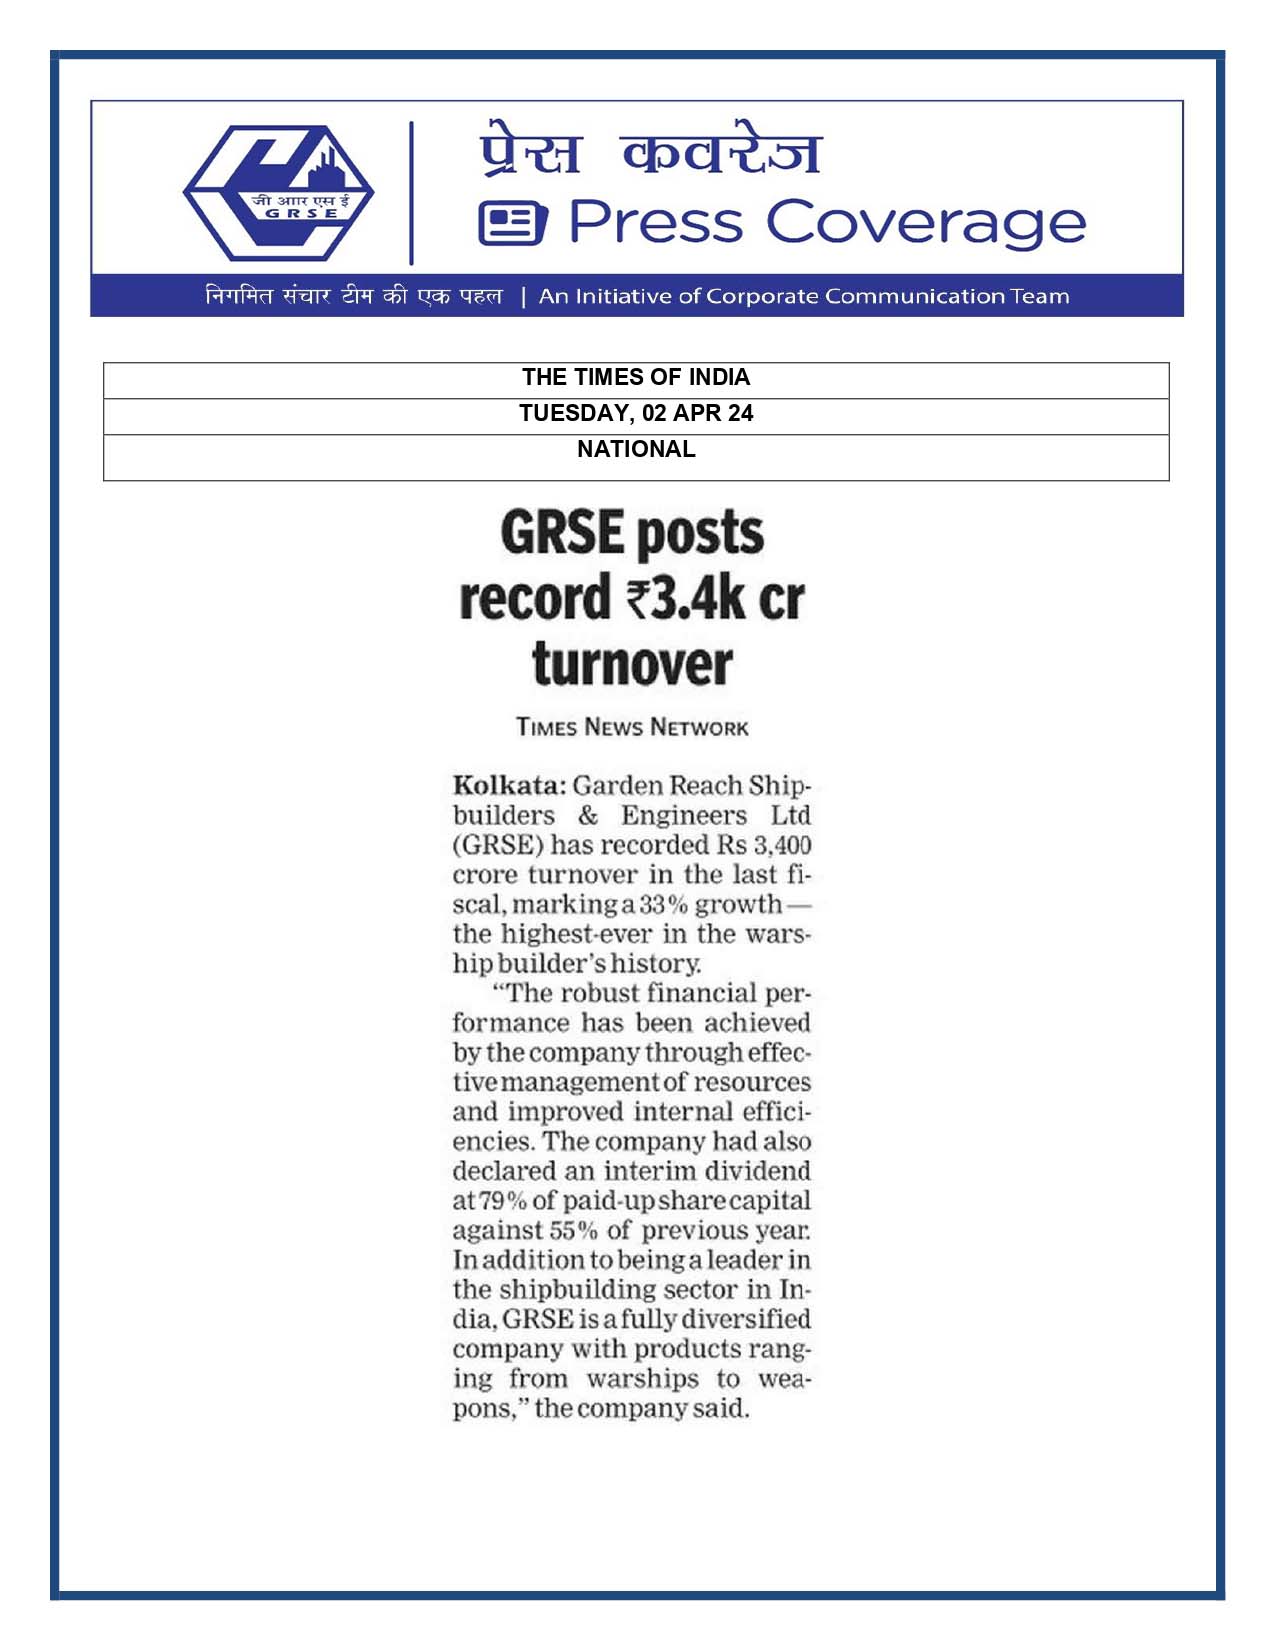 Press Coverage : The Times of India, 02 Apr 24 : GRSE posts record Rs 3.4k Cr turnover